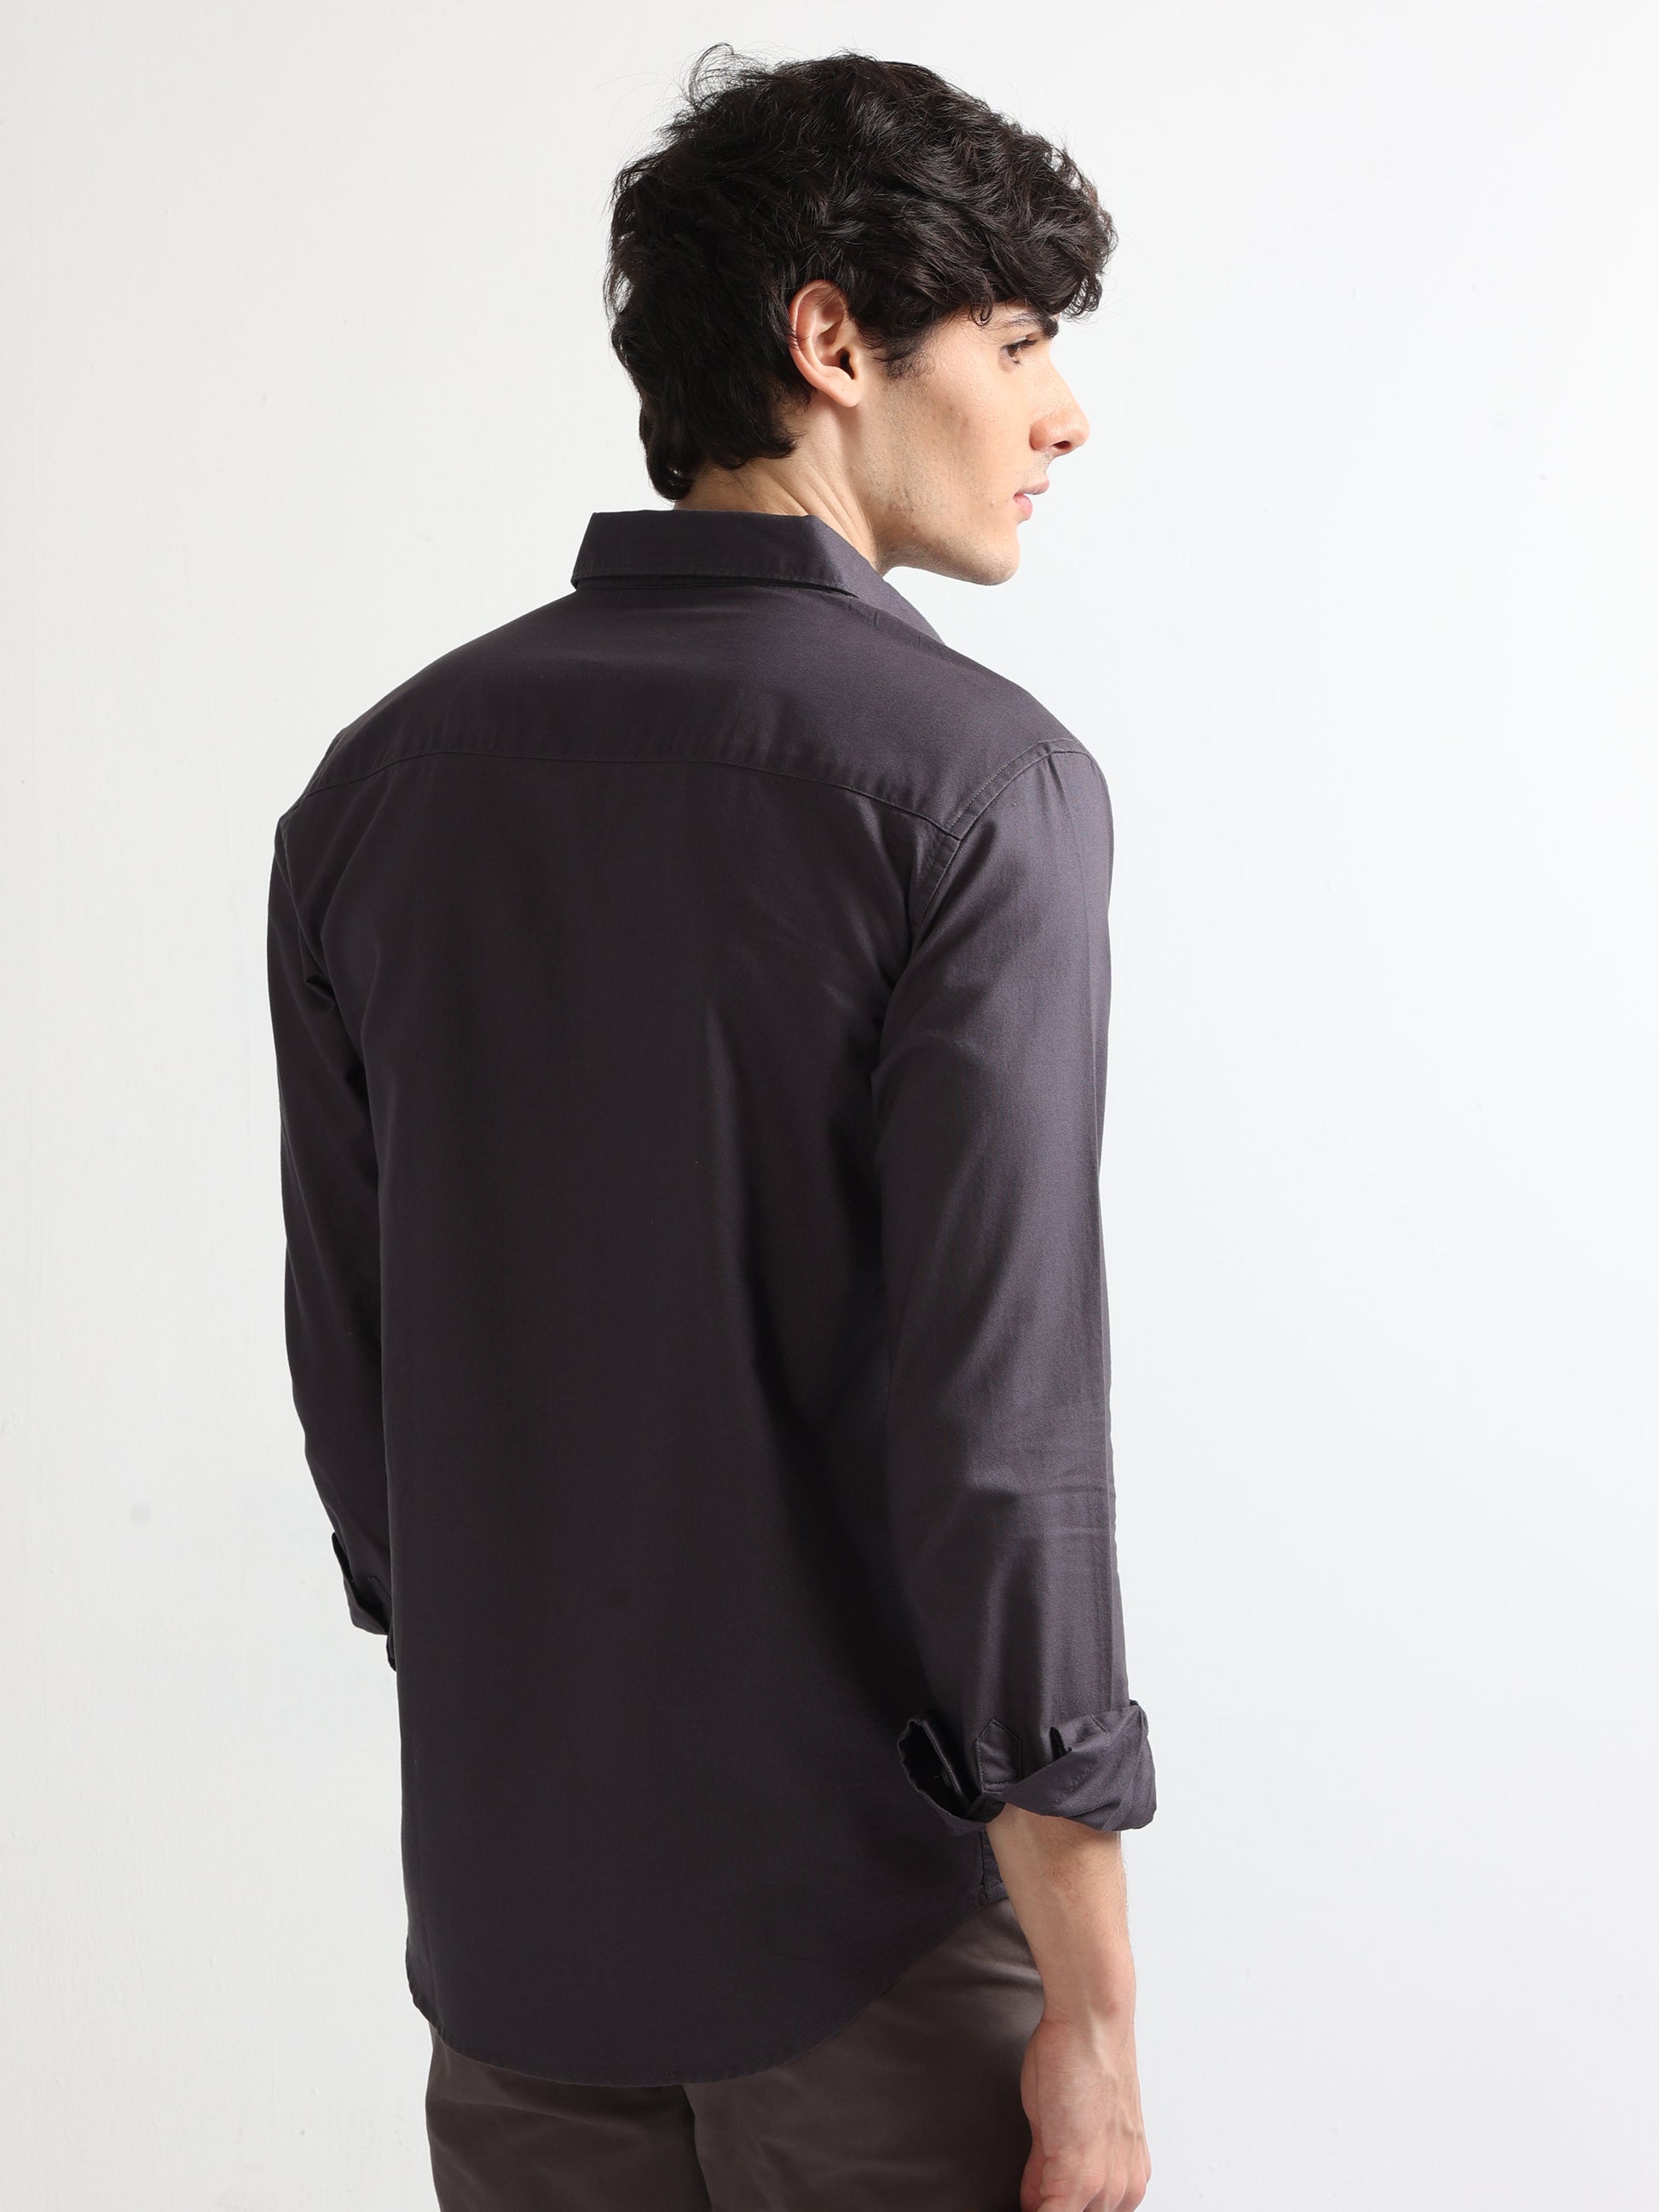 Buy Solid Full Sleeves Shirt For Work Wear Online.